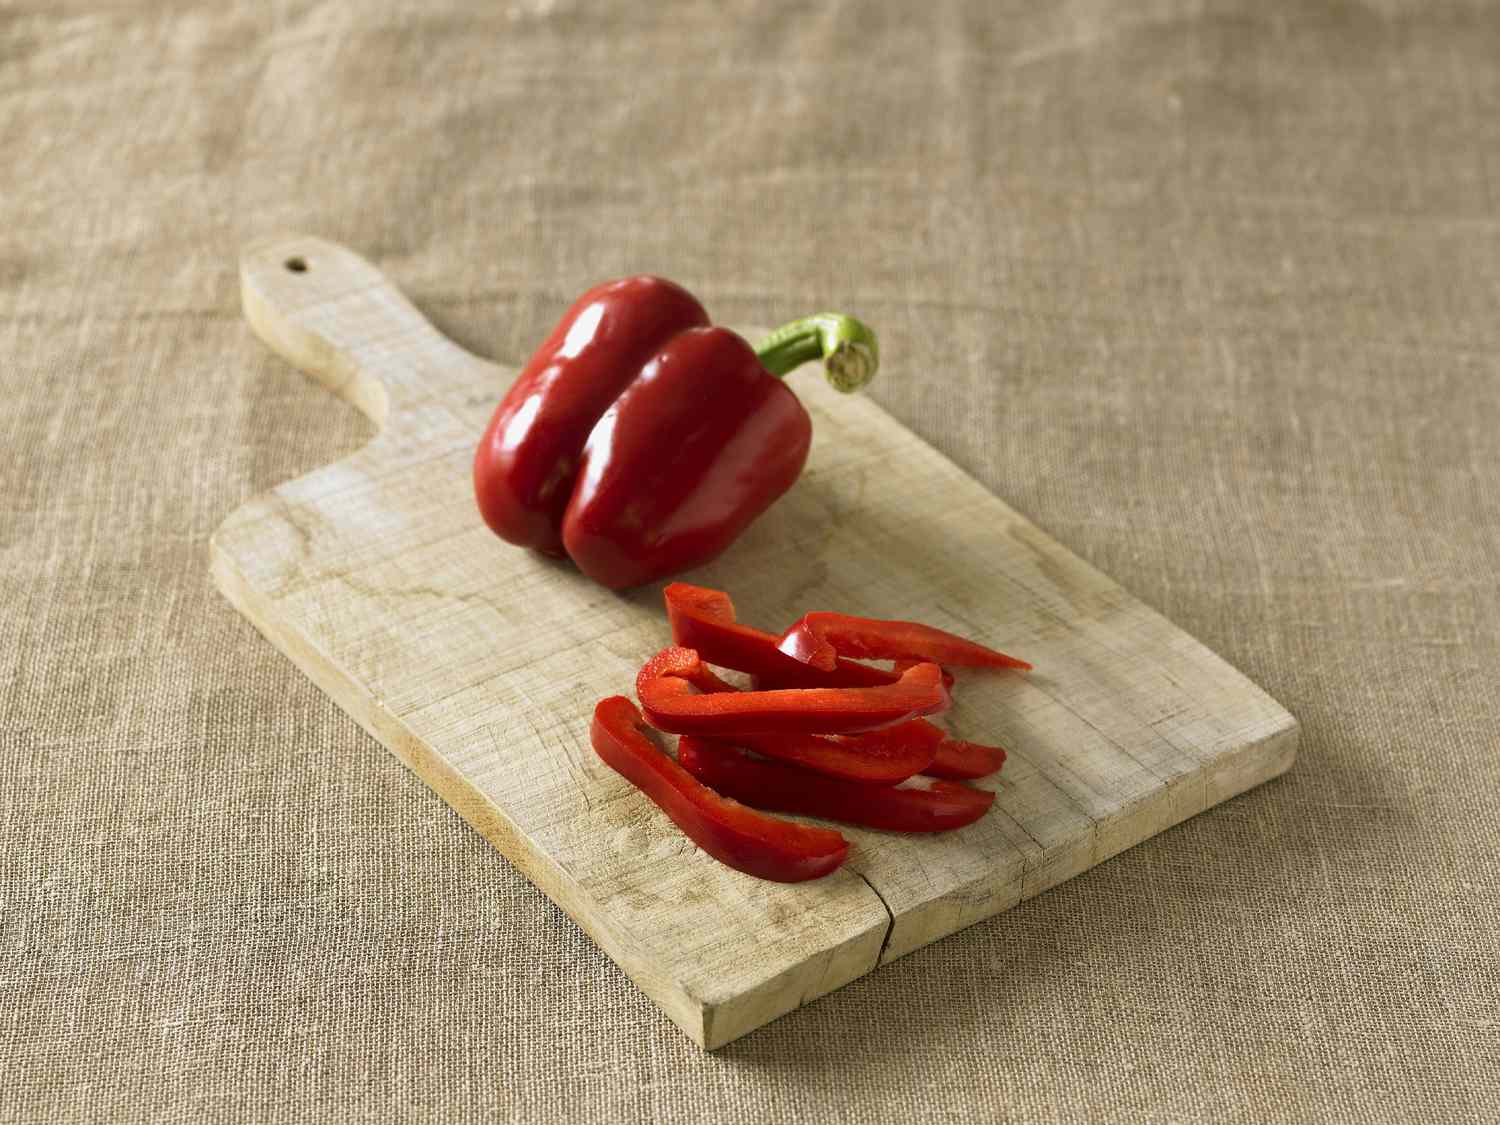 How To Store Peppers After Cutting